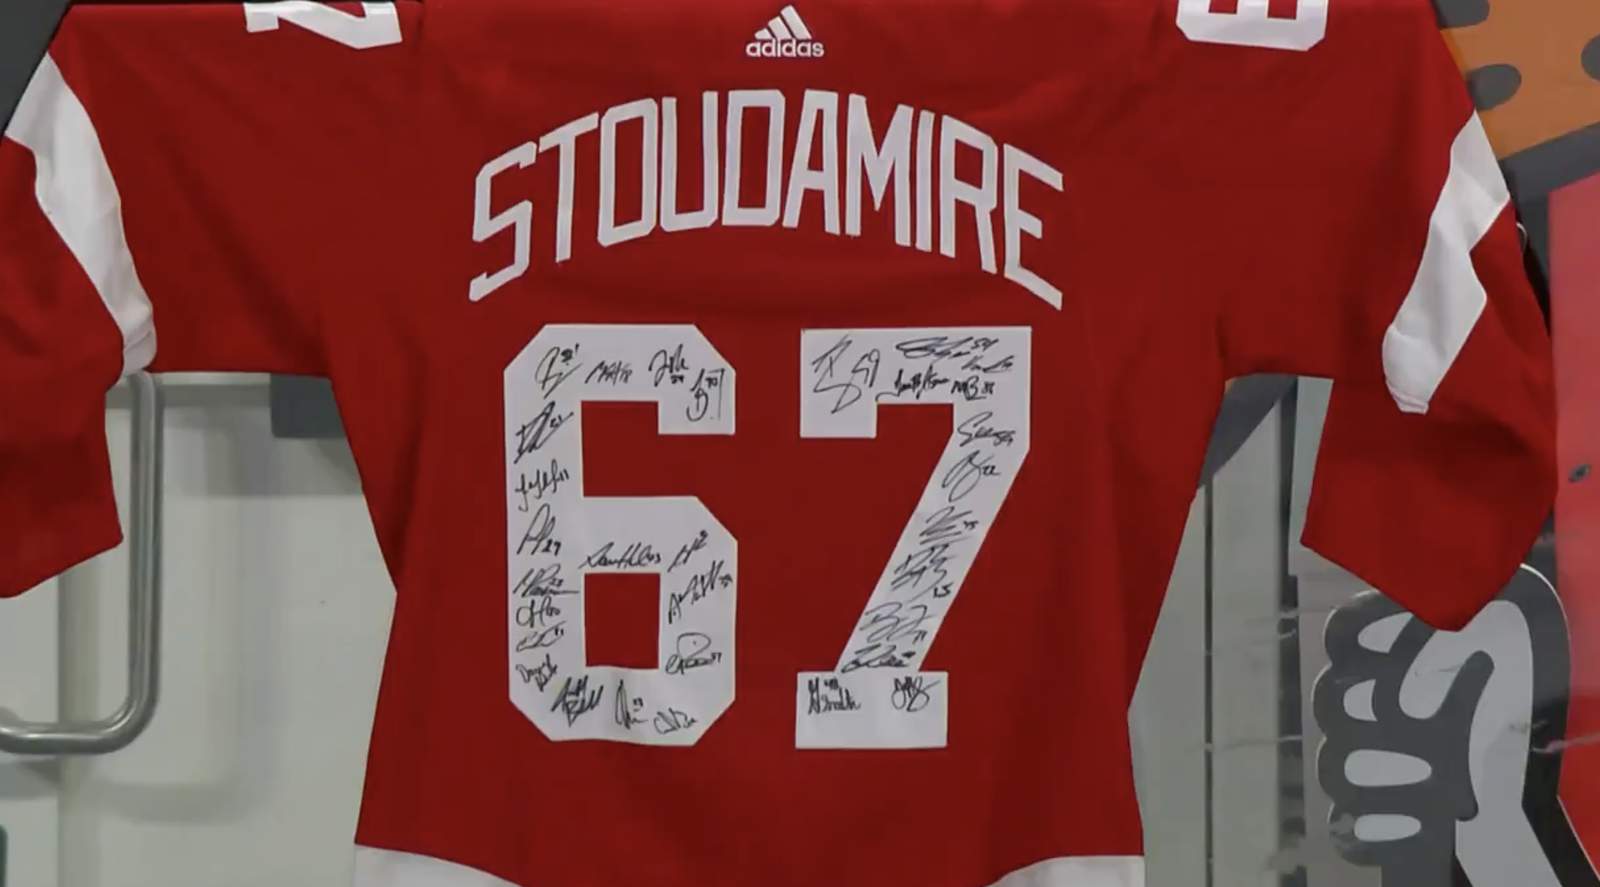 Red Wings pay tribute to Detroit community leader Marlowe Stoudamire